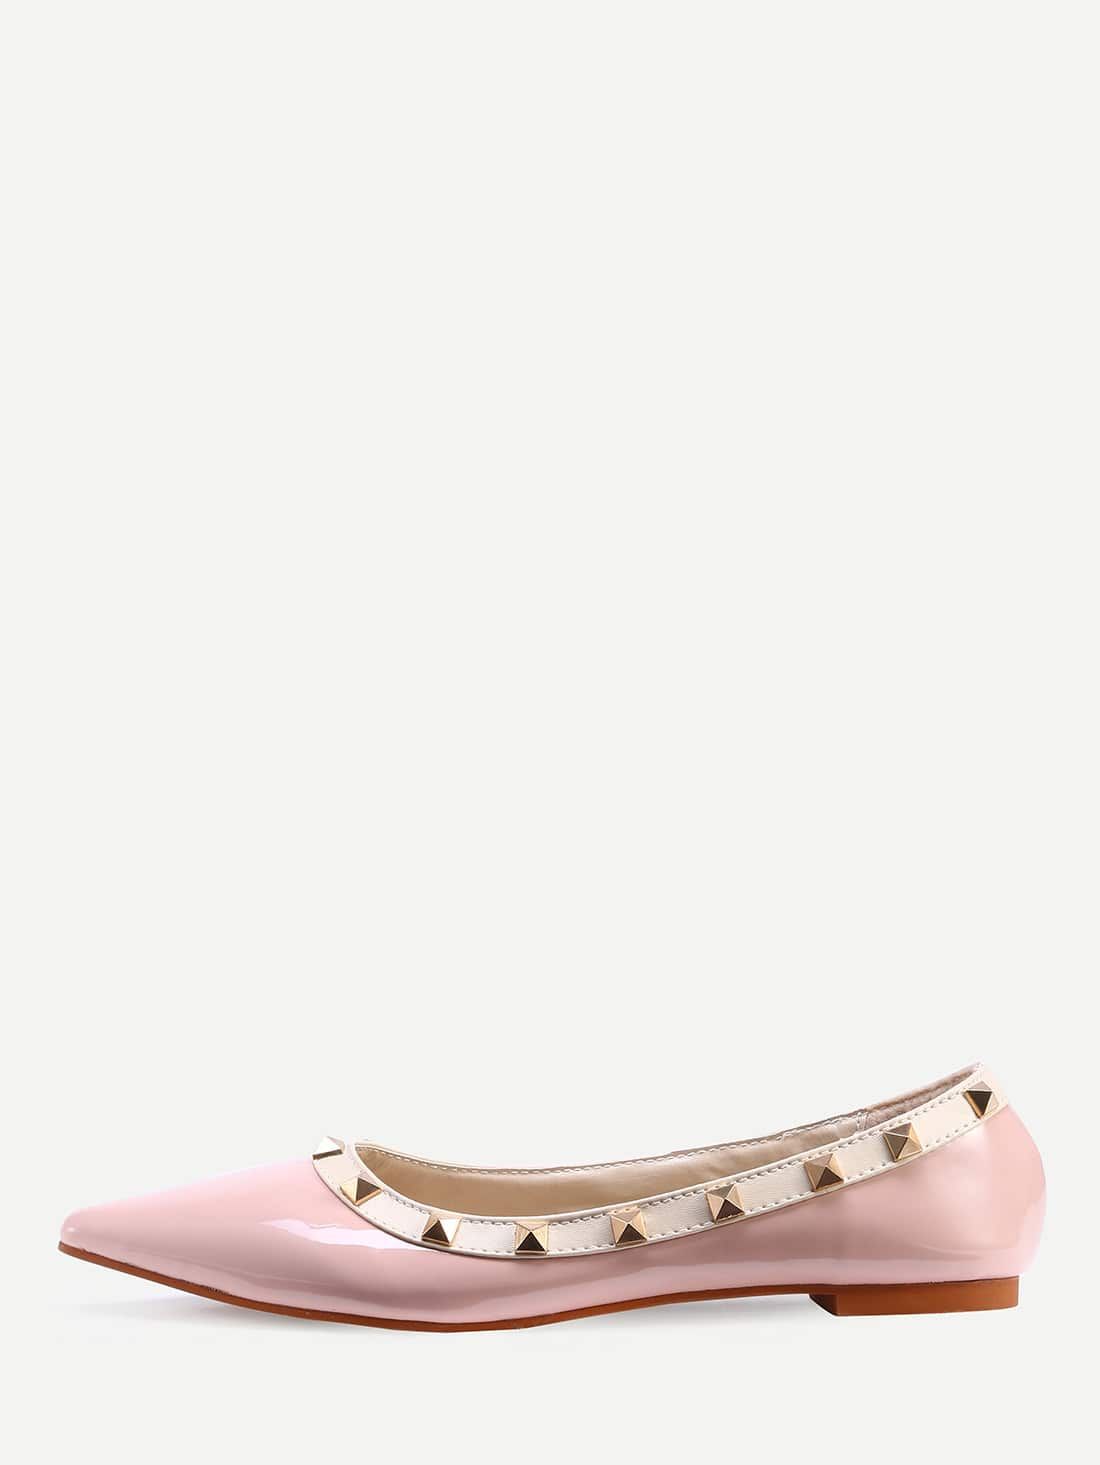 Pink Pointed Toe Studded Flats | SHEIN